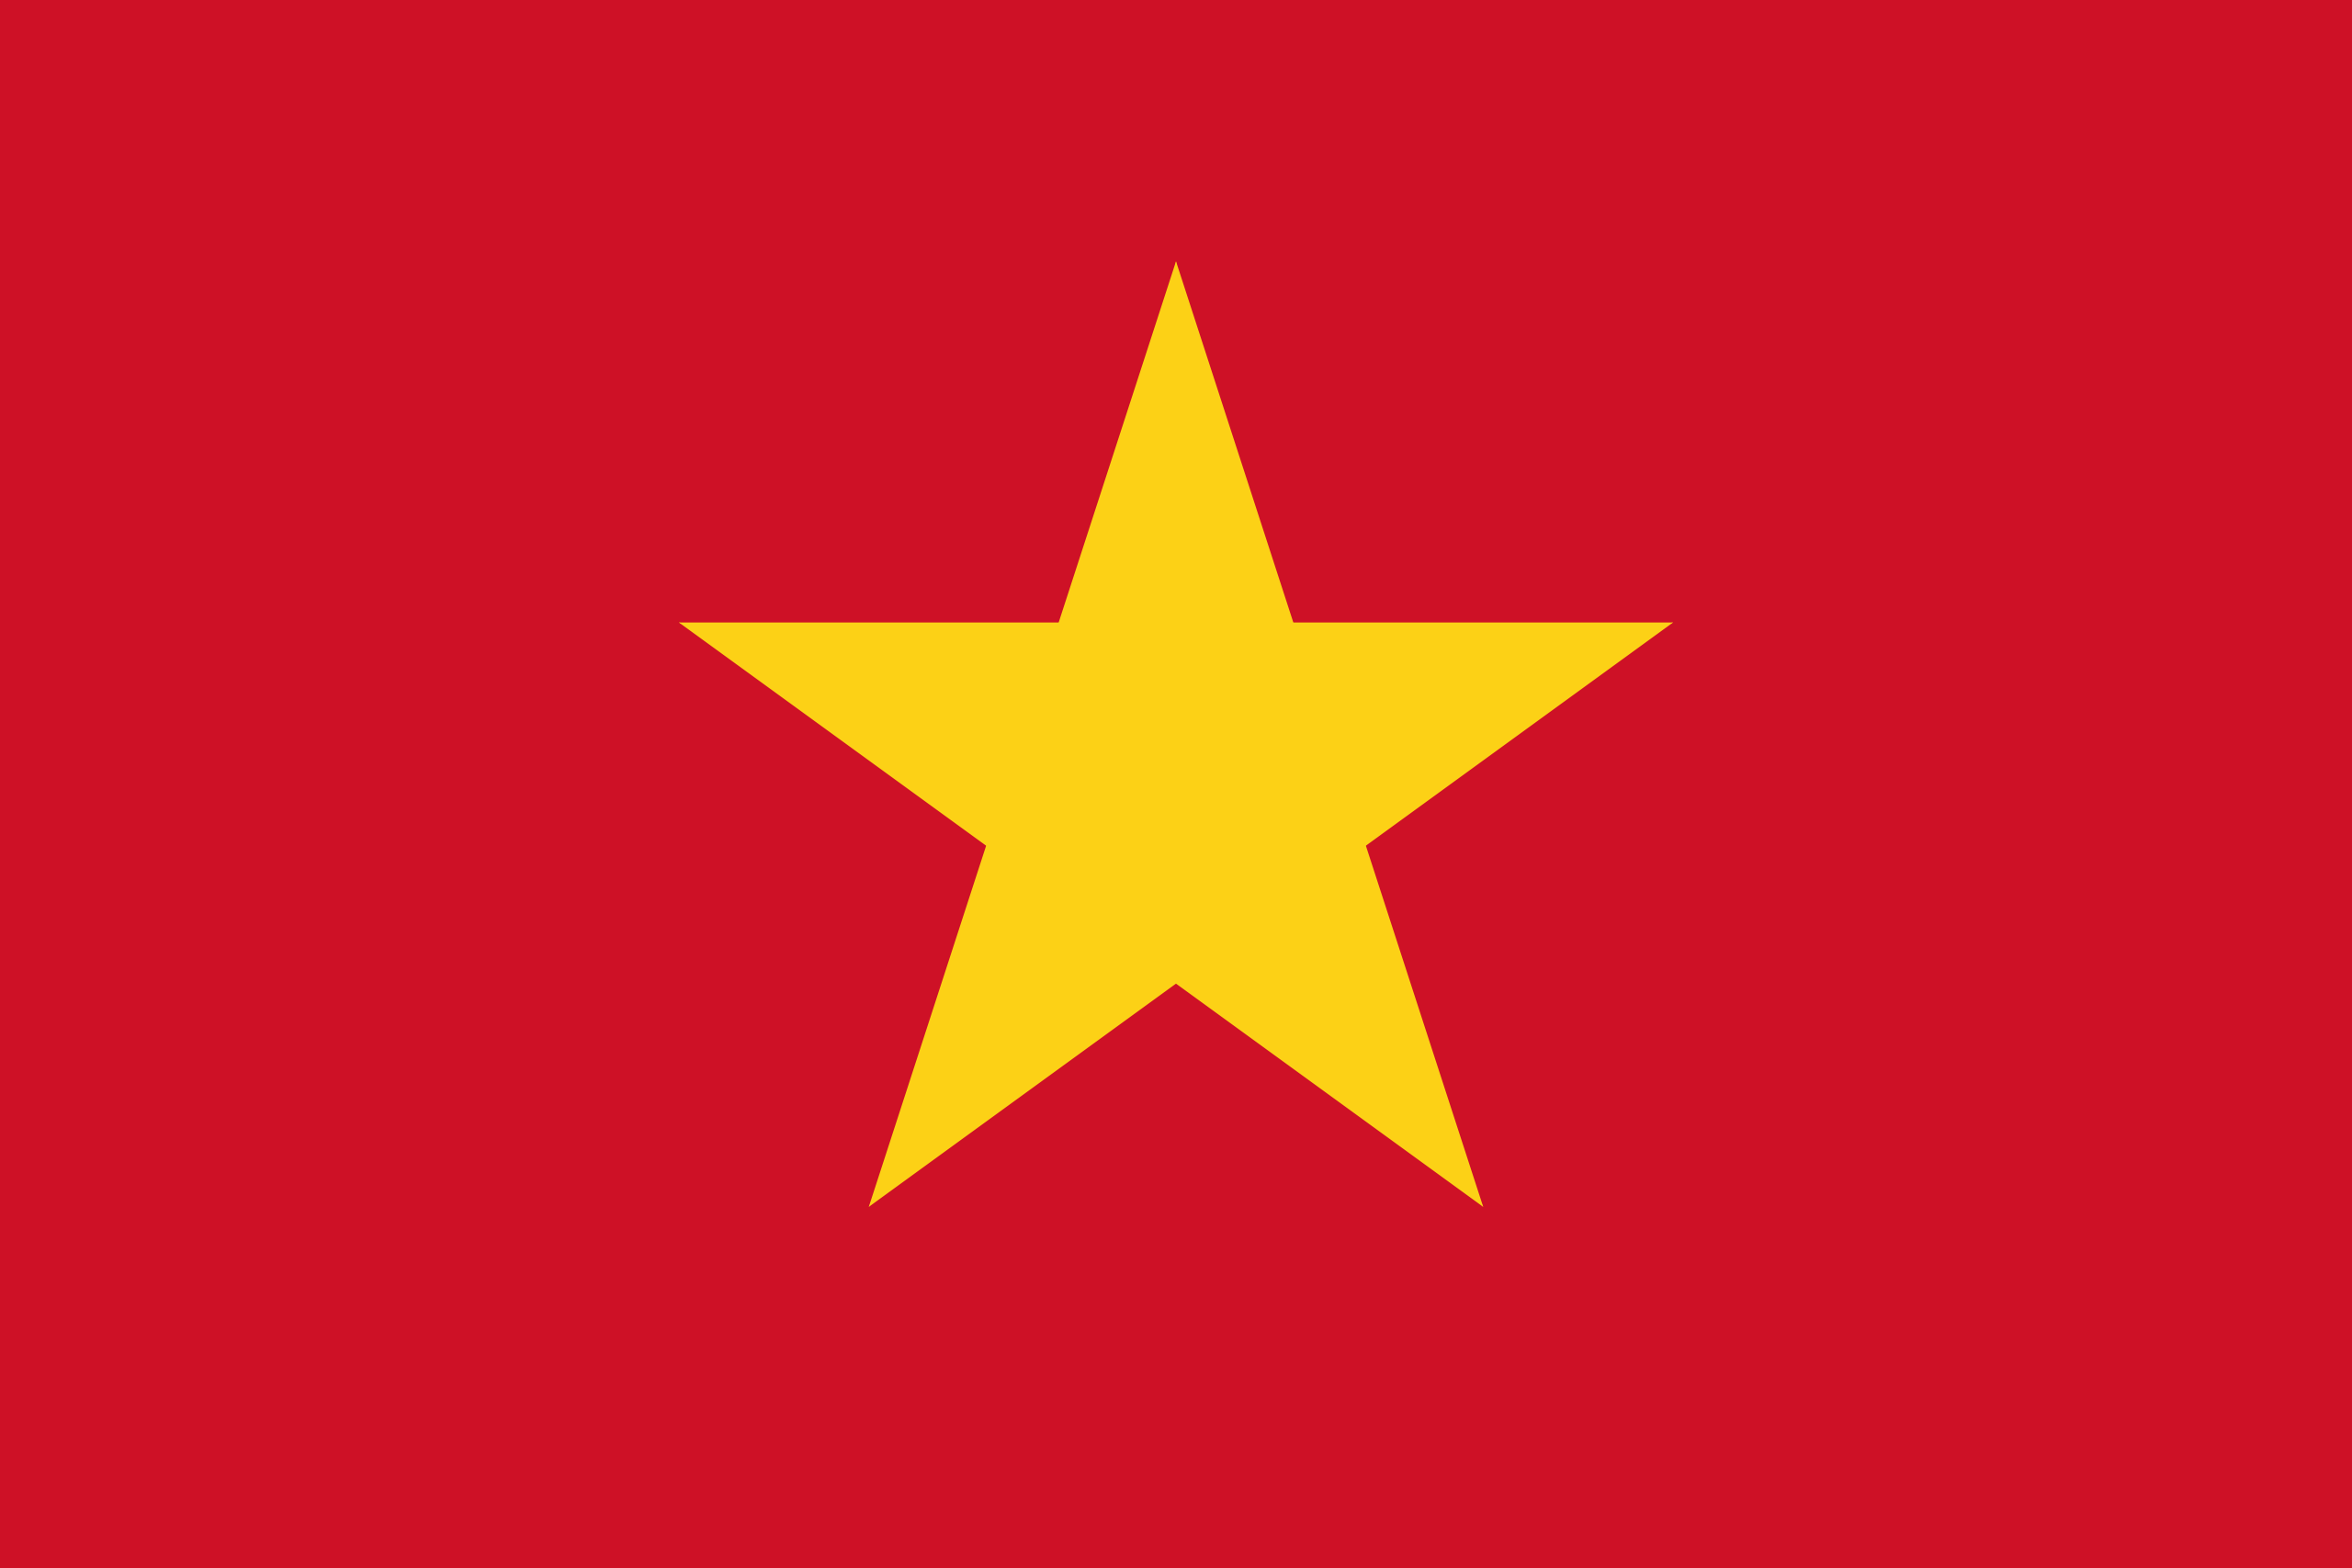 File:Flag map of Greater Viet